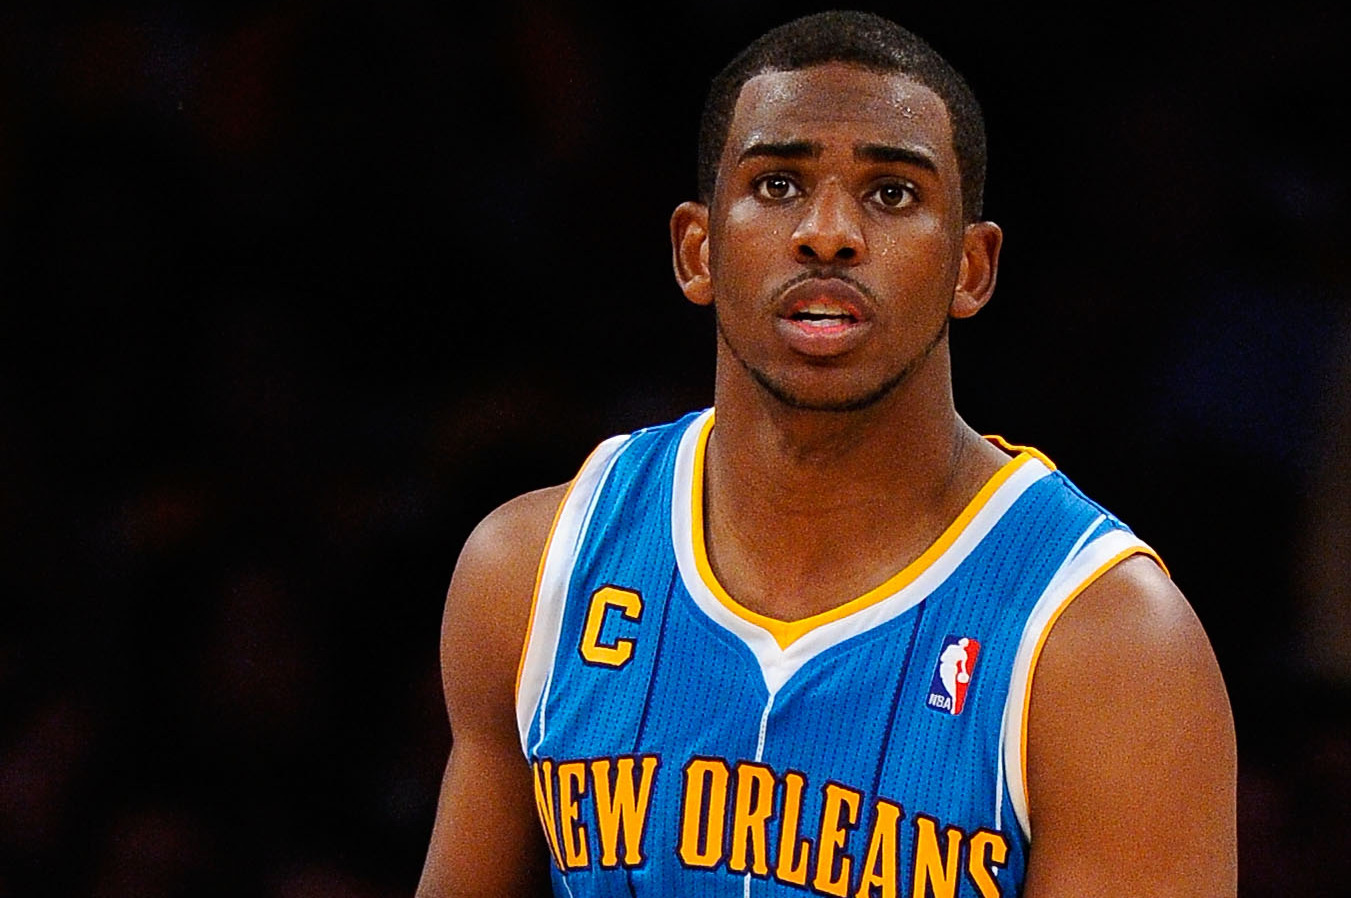 For Hornets to move forward, Chris Paul needs to go